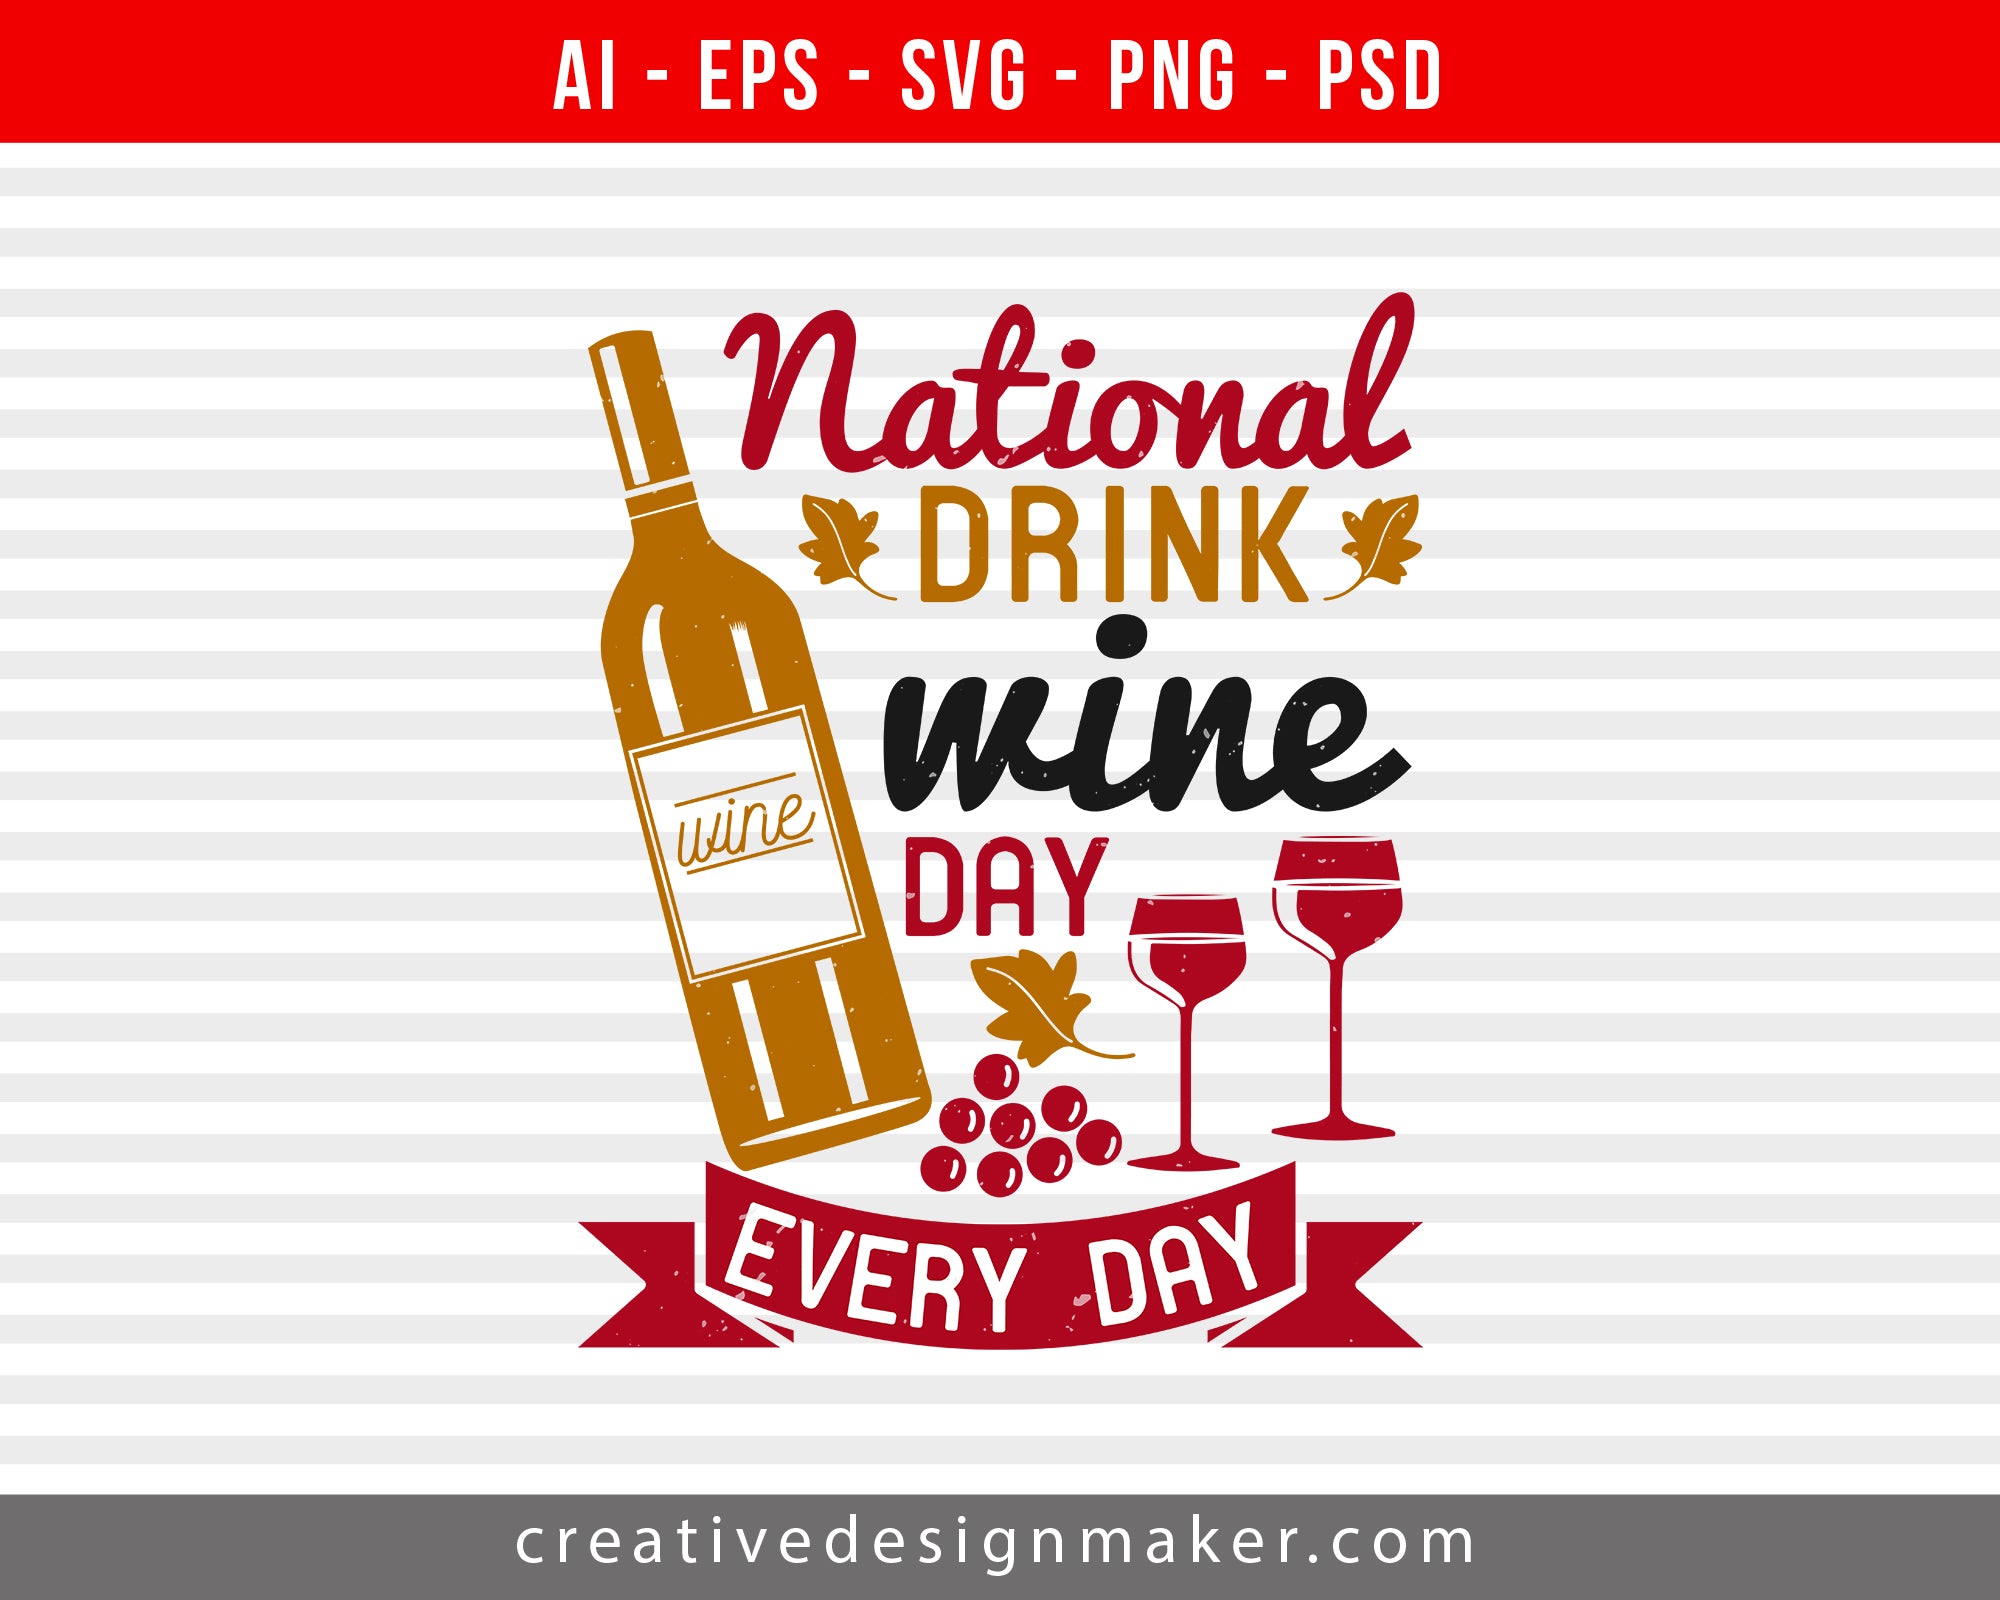 National drink wine day every day Print Ready Editable T-Shirt SVG Design!